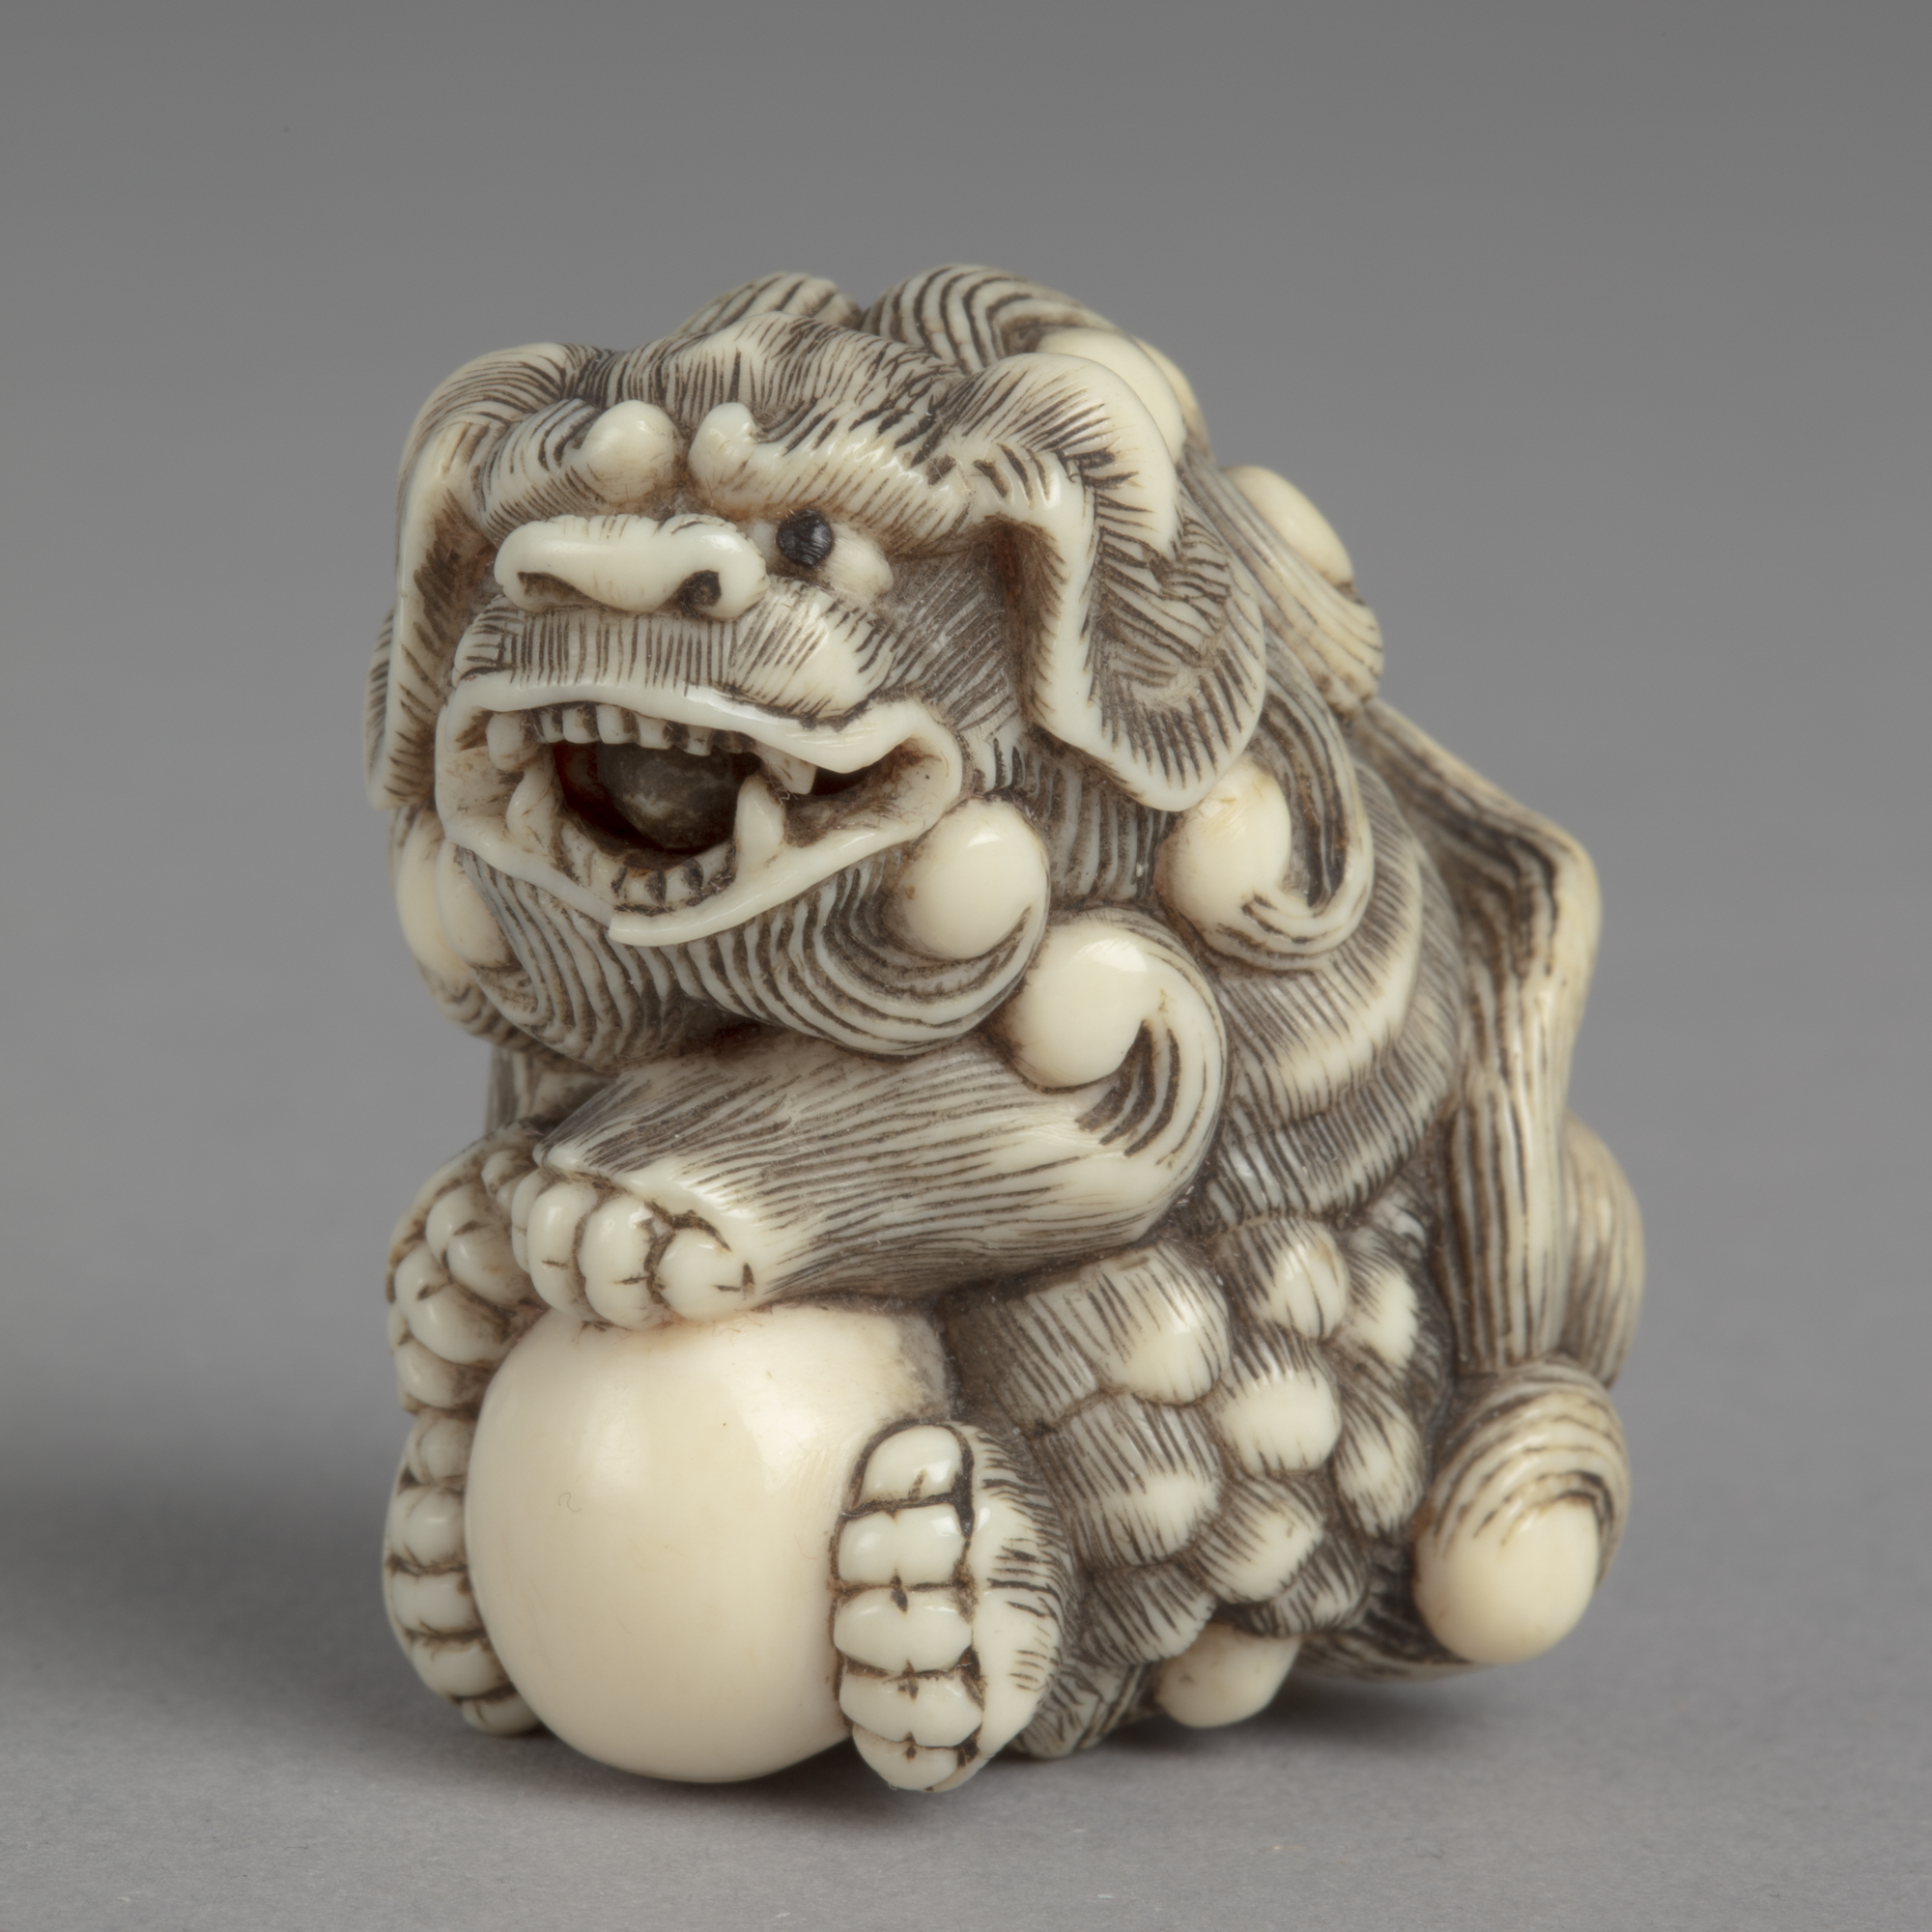 A Japanese ivory netsuke of a Buddhist lion with curly mane holding a smooth white ball in its four paws.